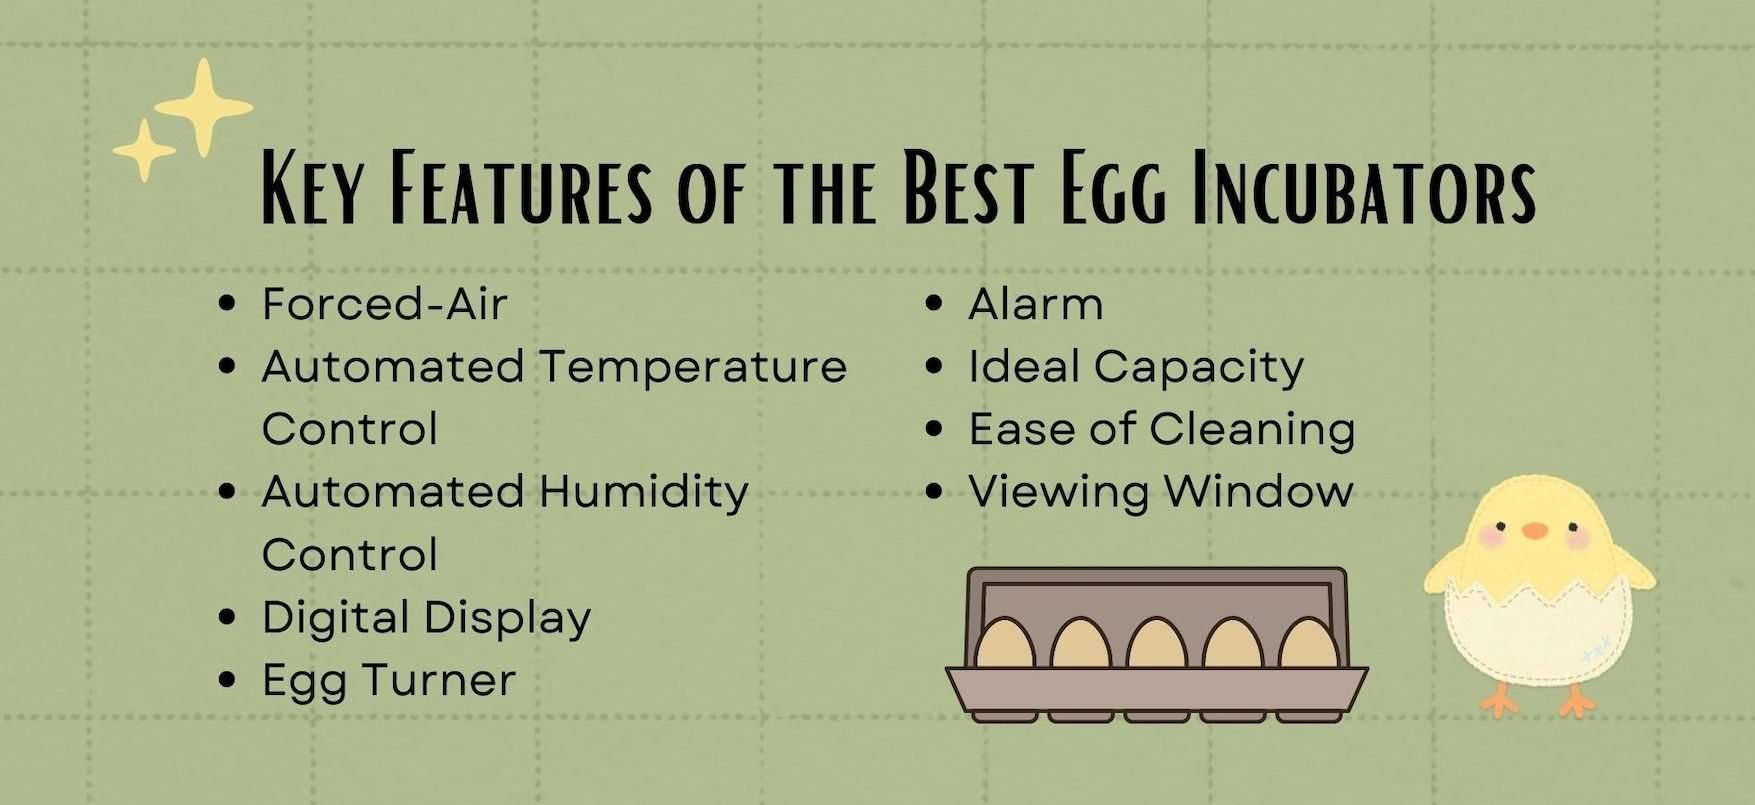 List of key features of the best egg incubators. Green background.